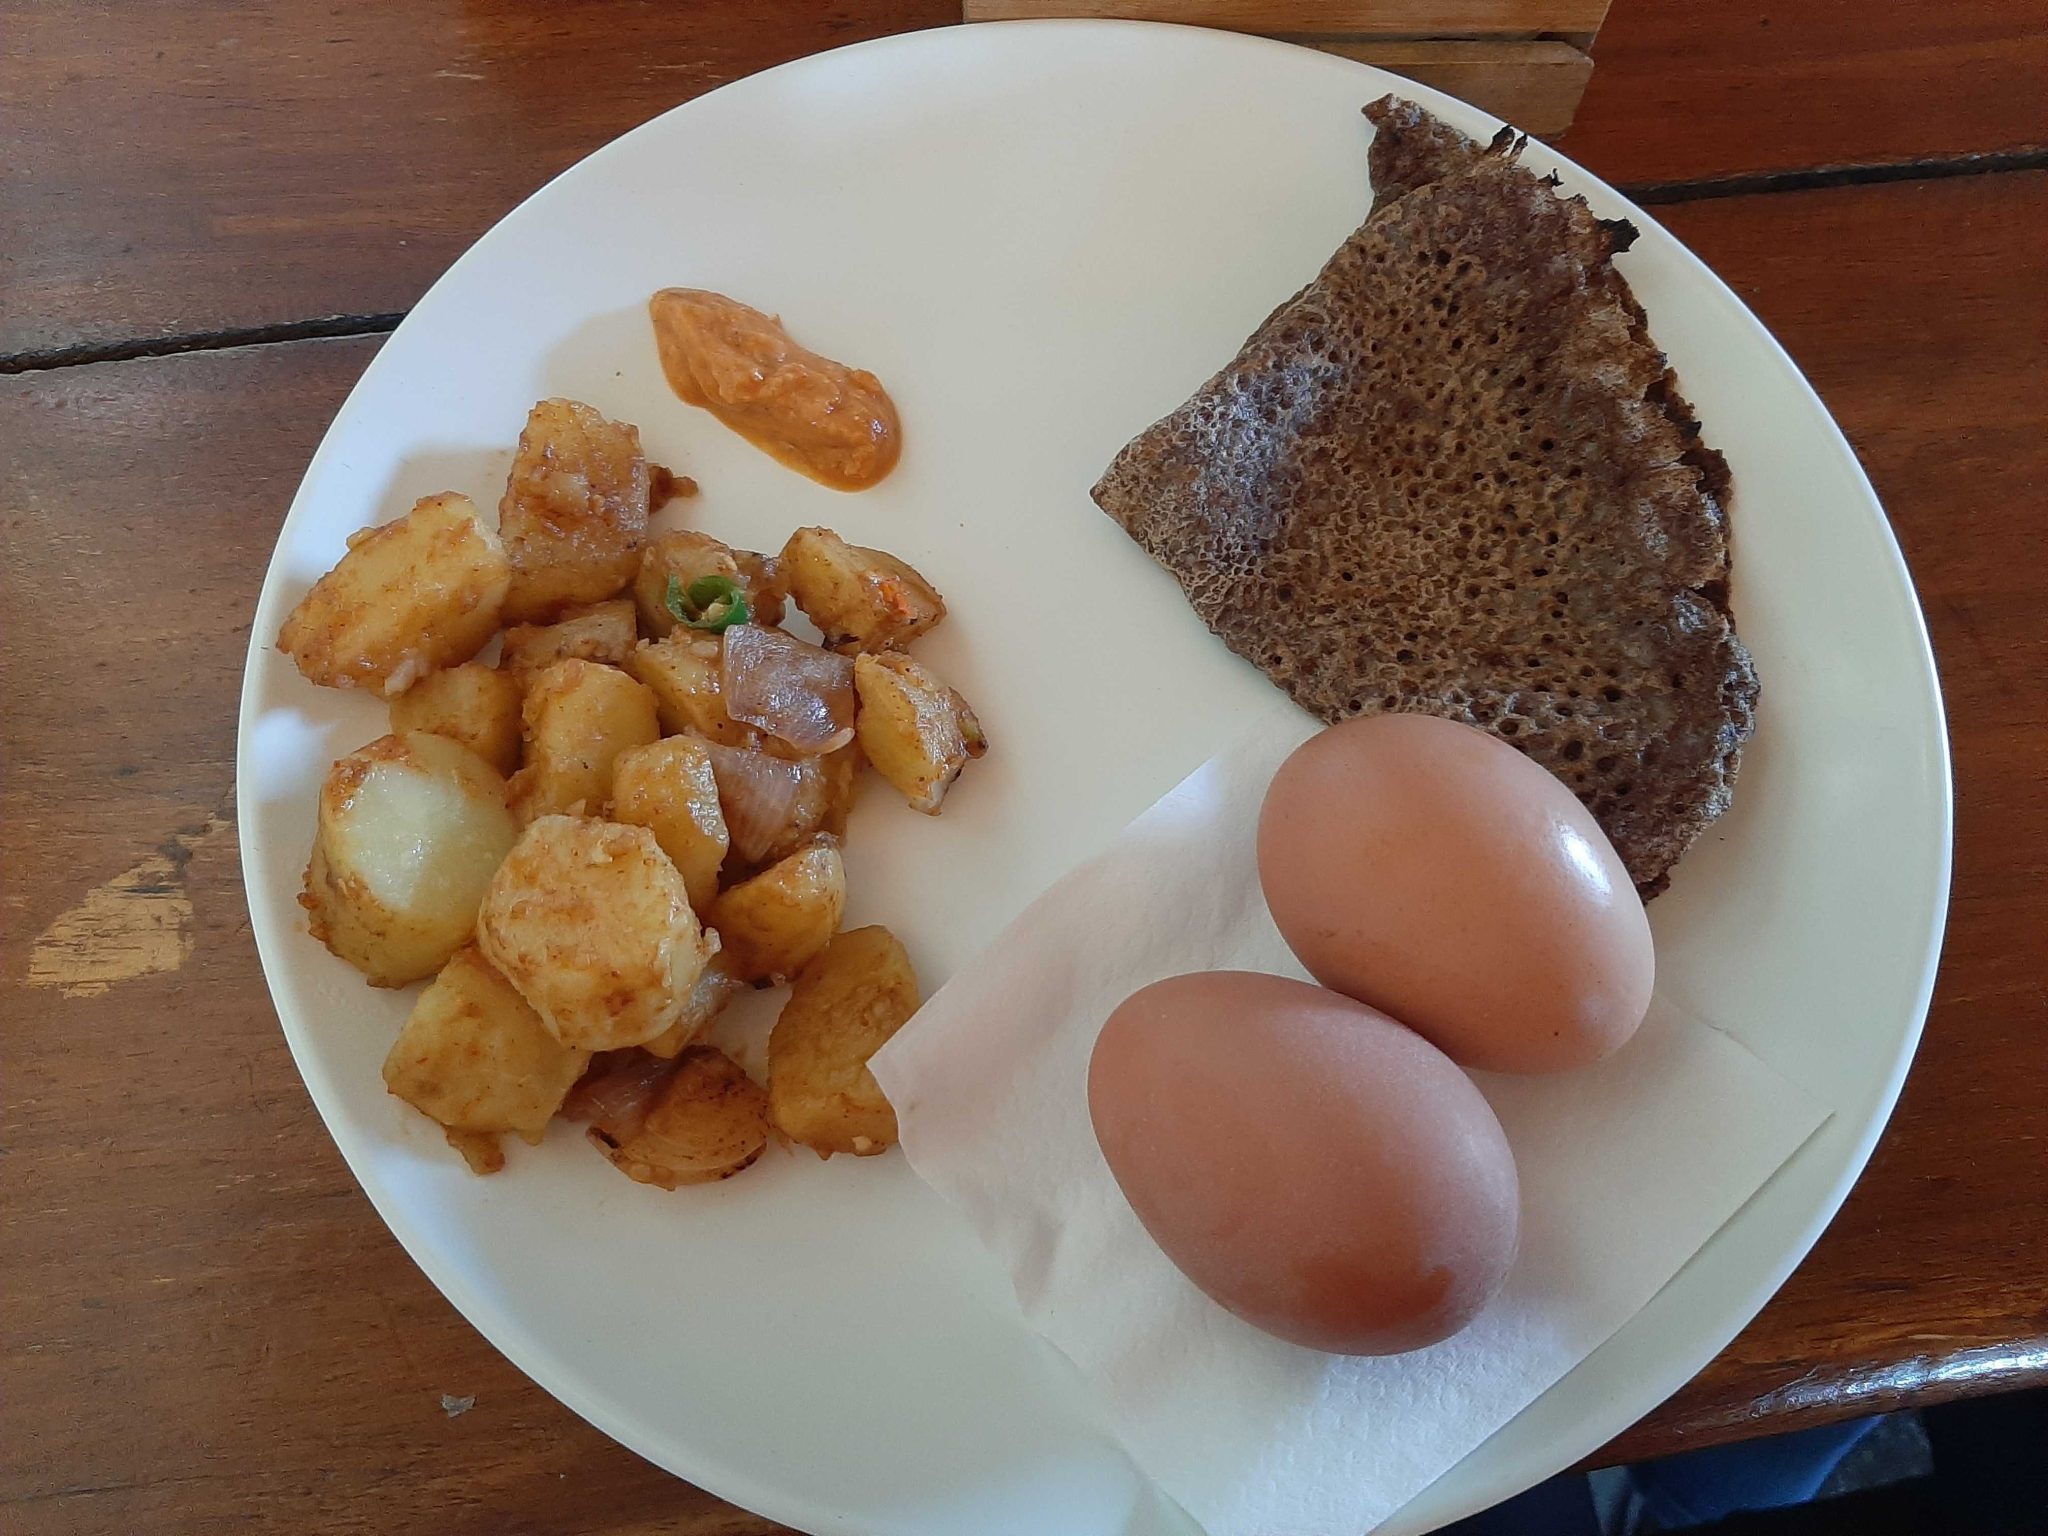 Breakfast from Himalayas - Millet Bread, Spicy Potato, Pickle, and Eggs